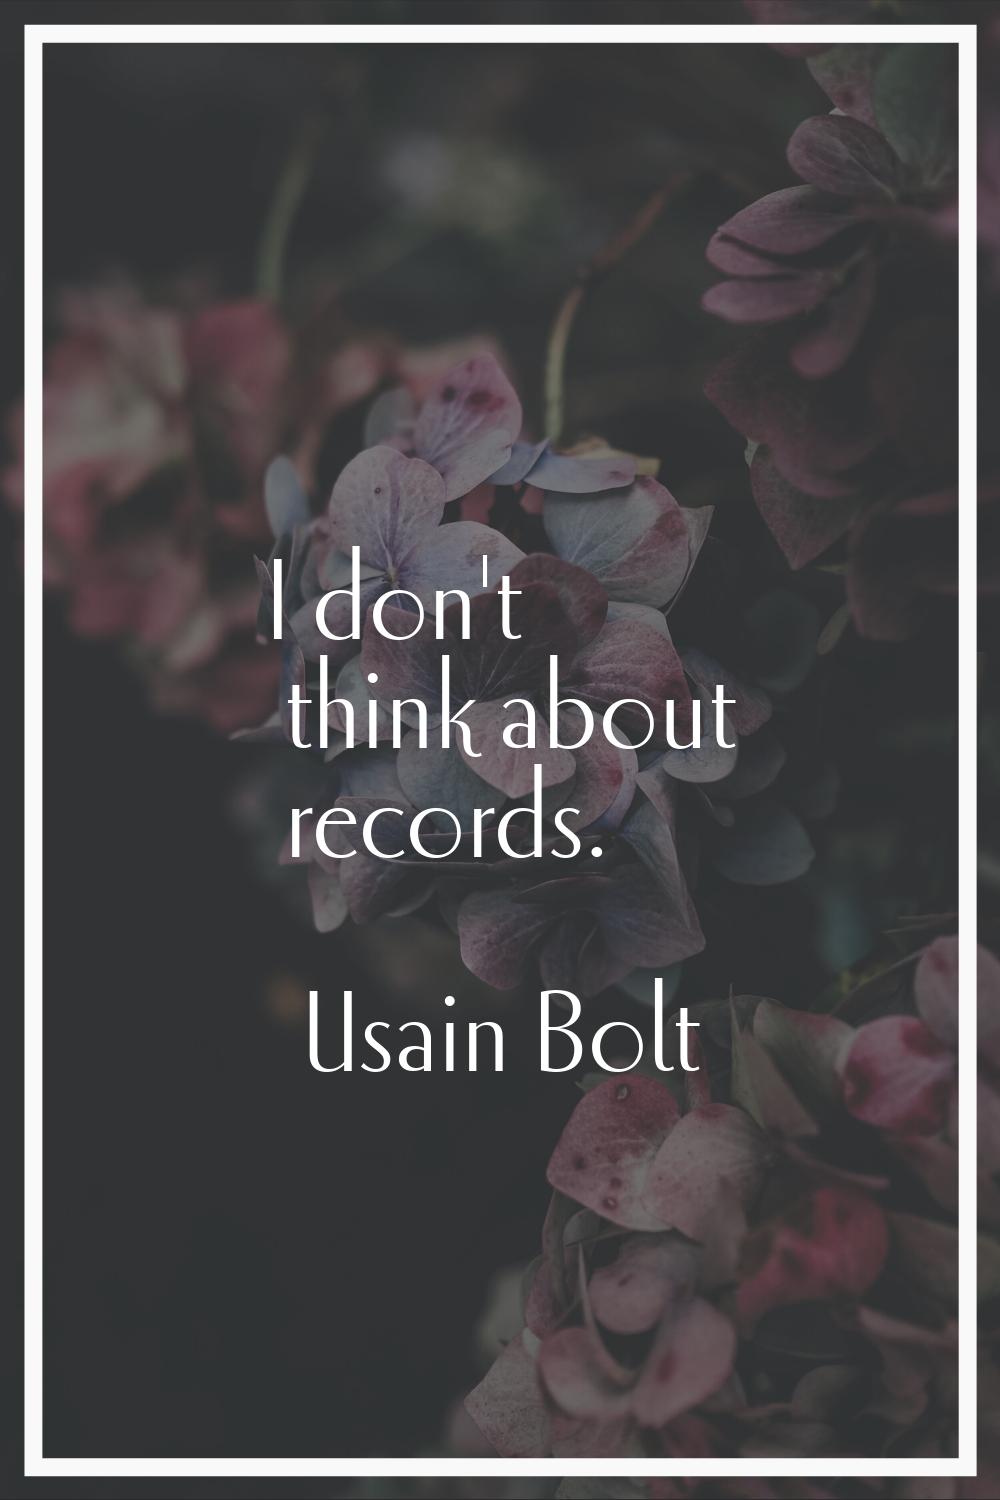 I don't think about records.